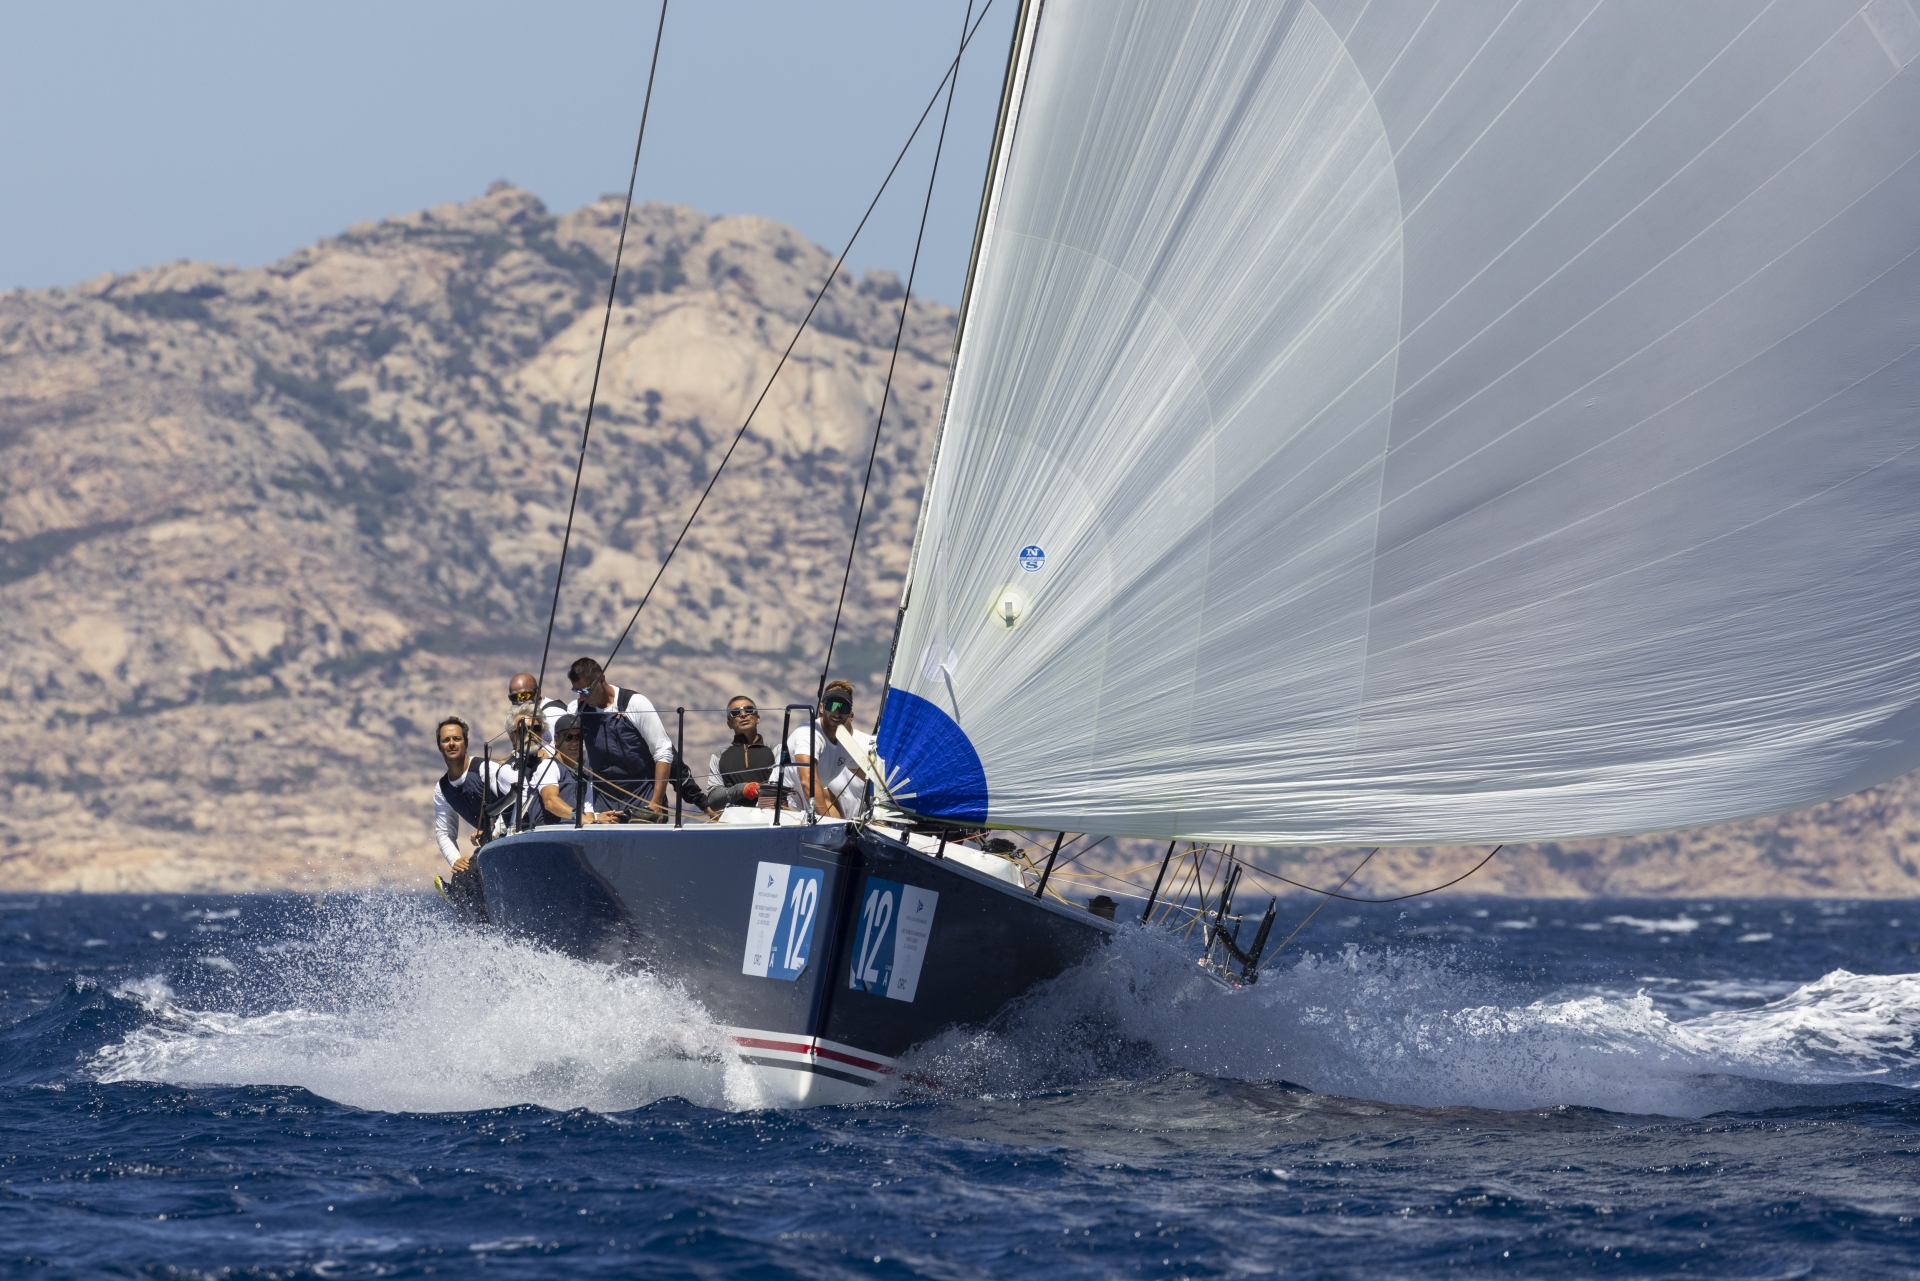 Another exciting inshore race day at the 2022 ORC World Championship - News - Yacht Club Costa Smeralda